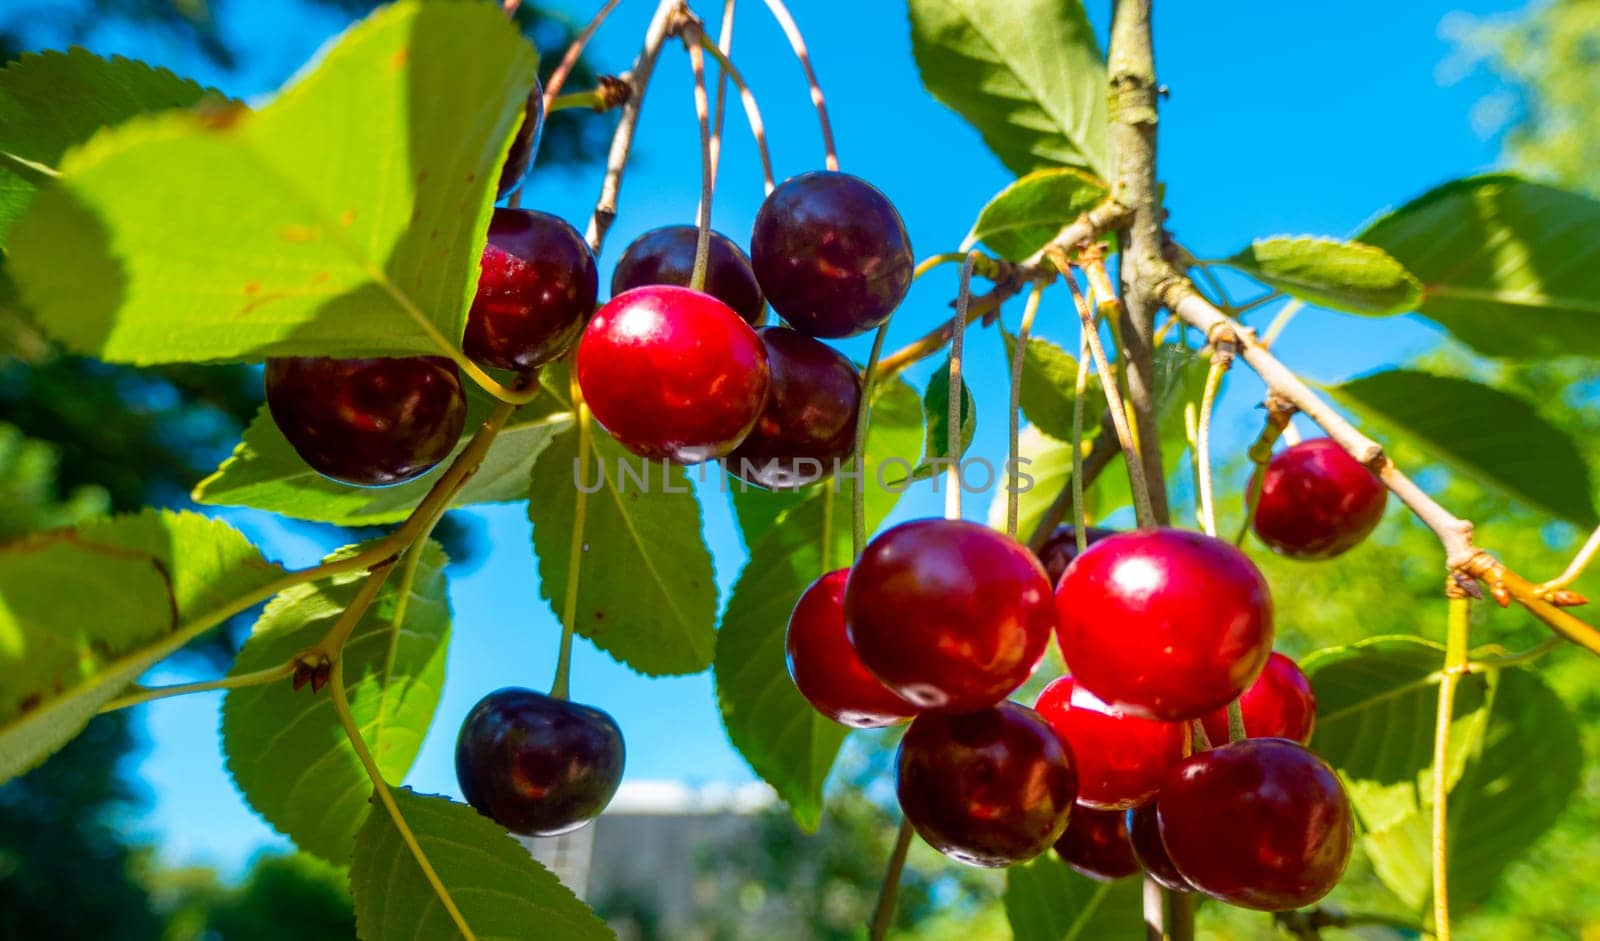 Red and sweet cherries on a branch just before harvest in early summer by kajasja